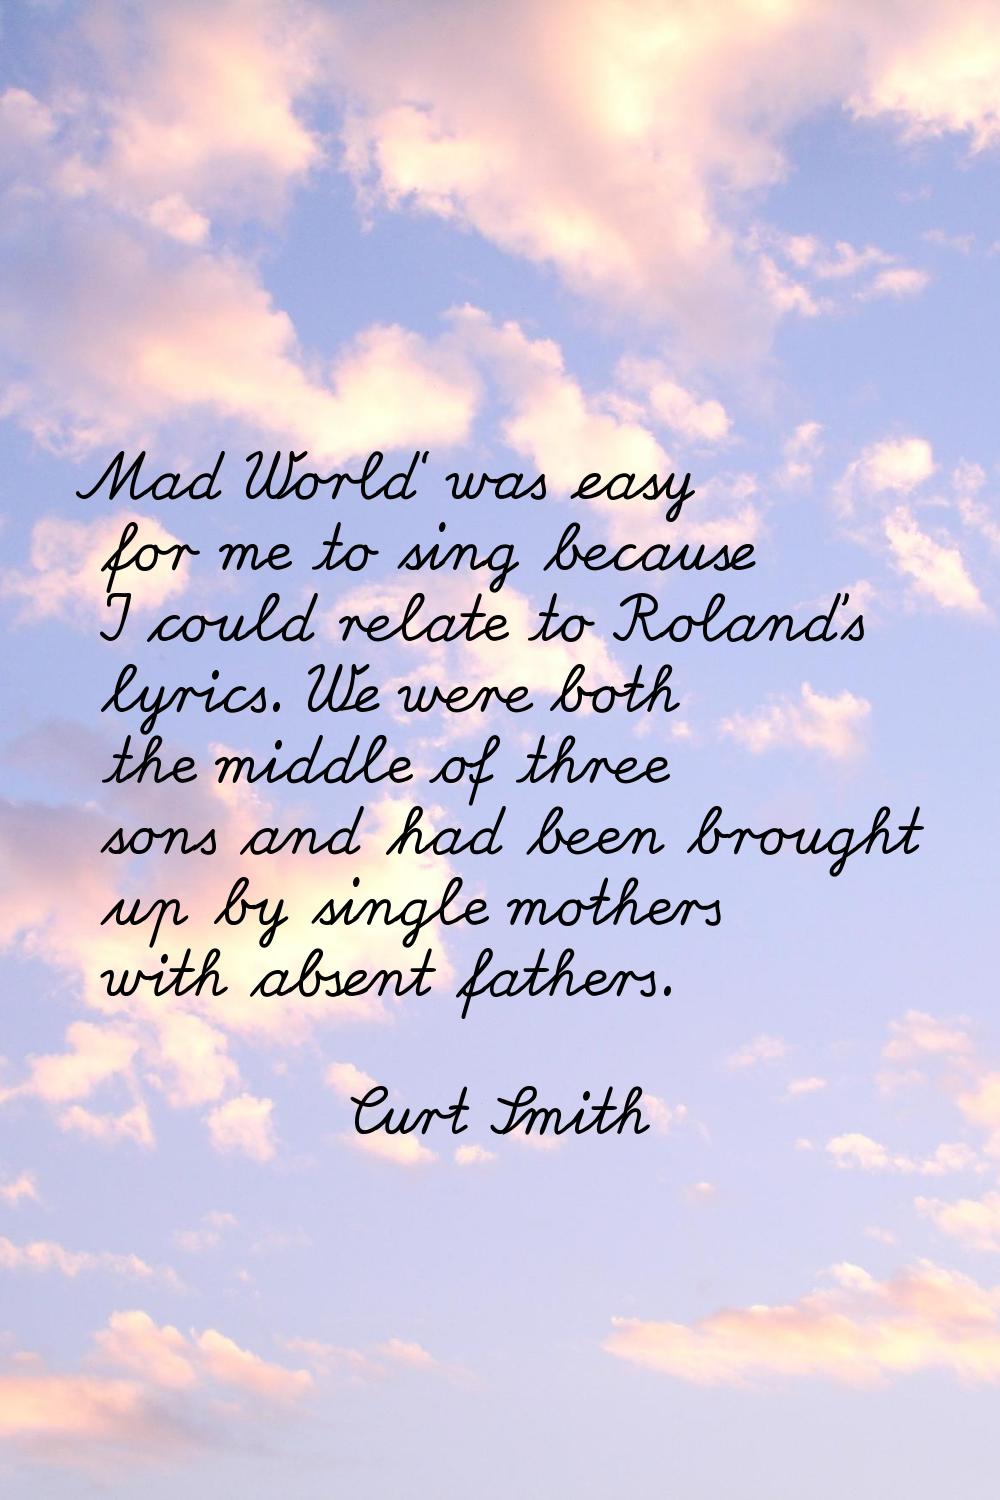 Mad World' was easy for me to sing because I could relate to Roland's lyrics. We were both the midd